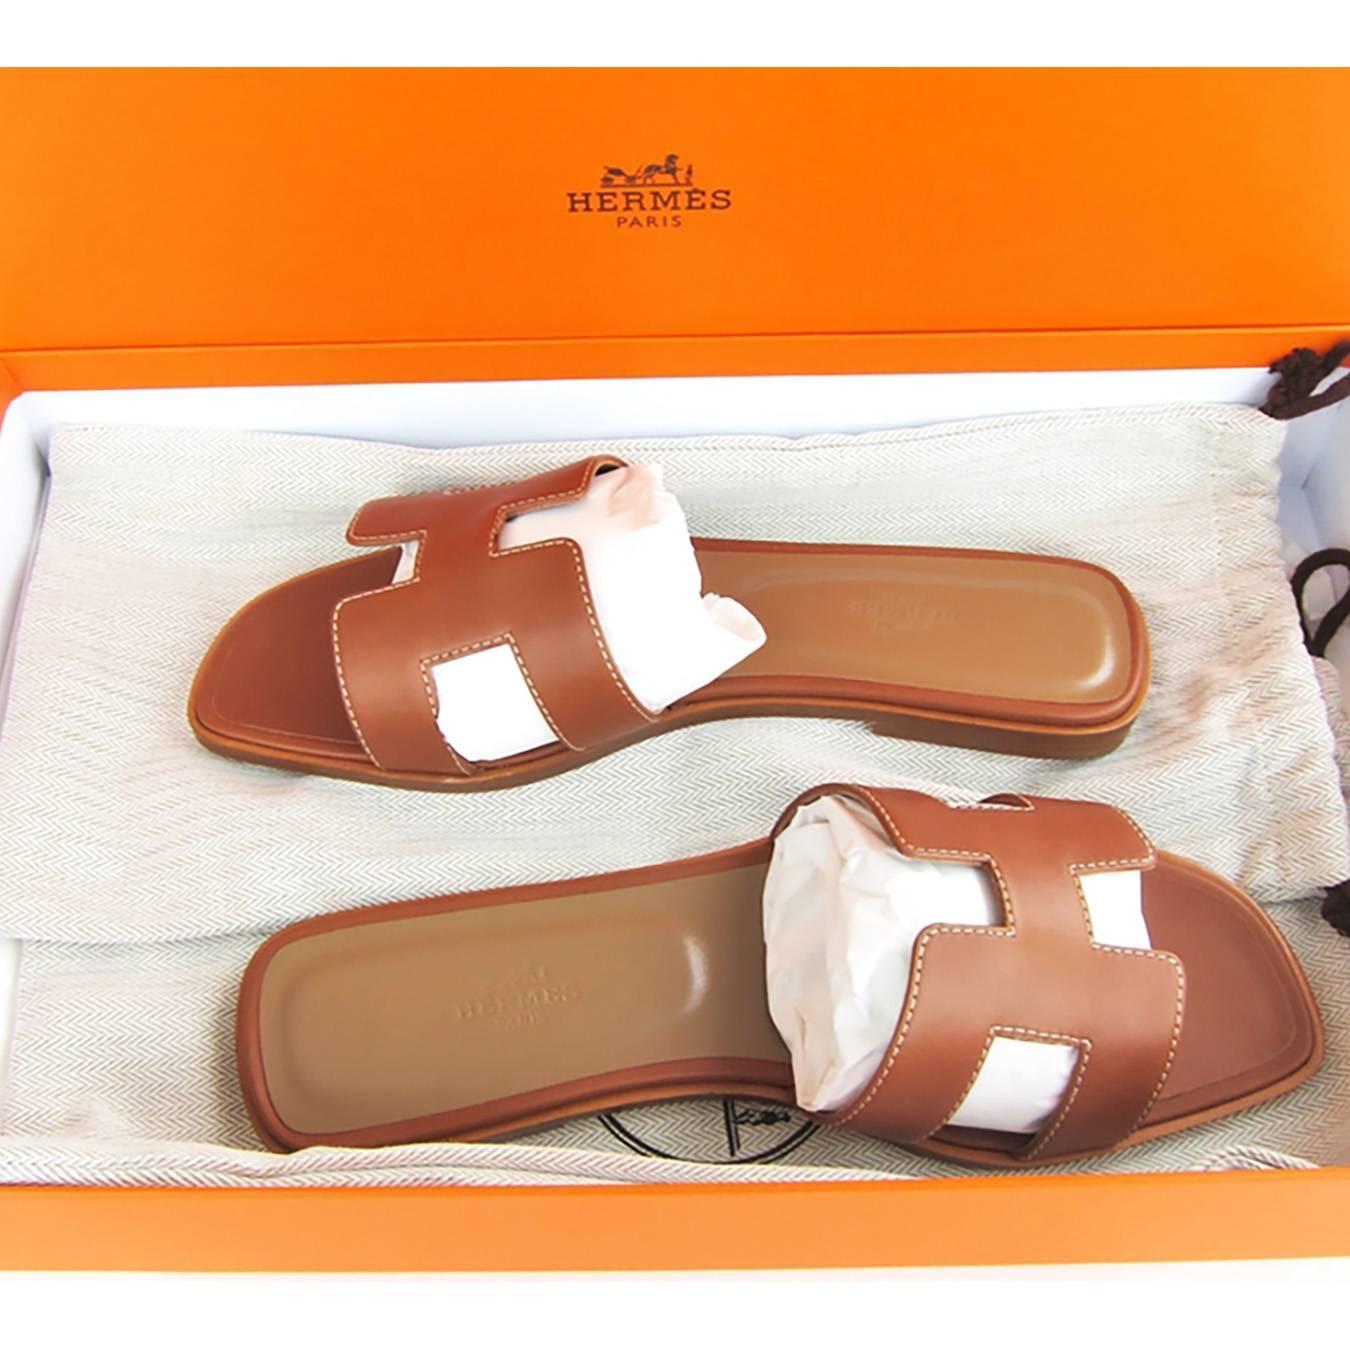  Hermes  Gold Oran Box Leather Sandals  Shoes  Size 40 or 3 9 